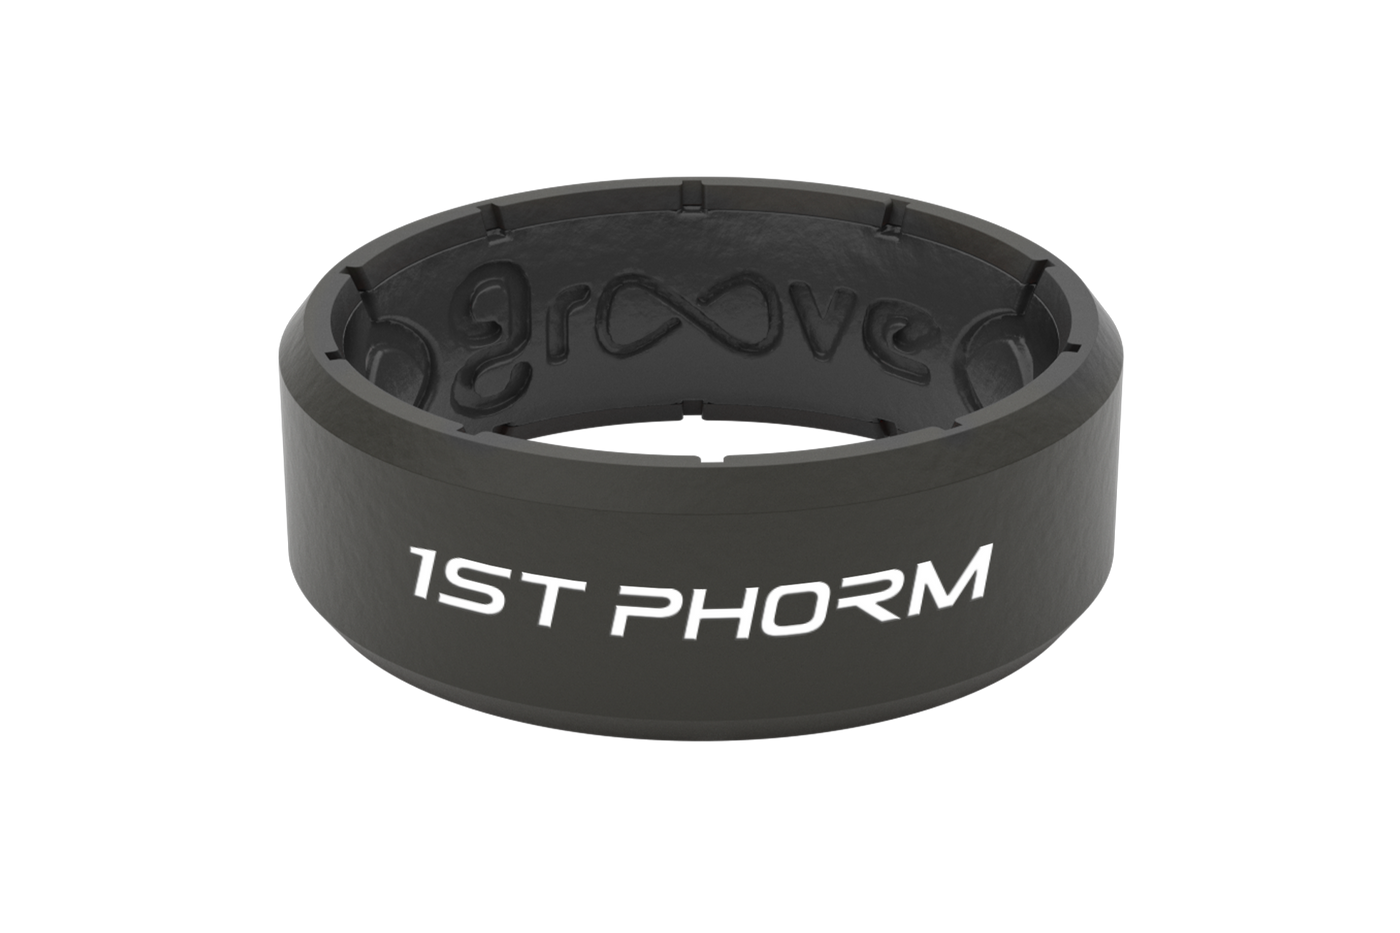 1st Phorm Groove Ring - 7mm Thick